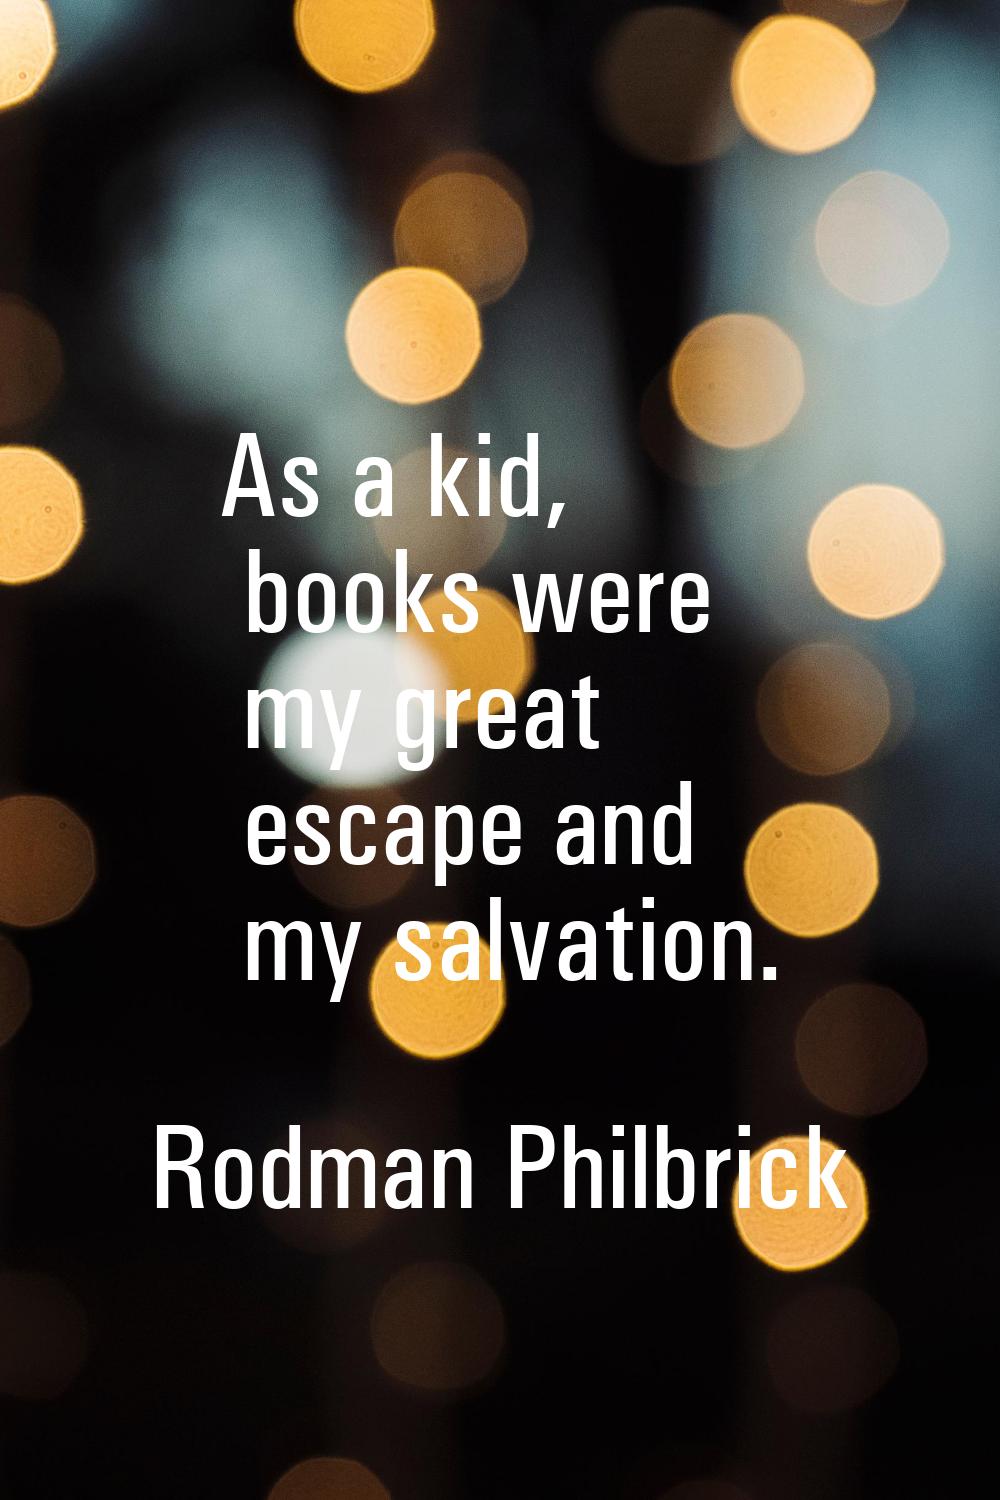 As a kid, books were my great escape and my salvation.